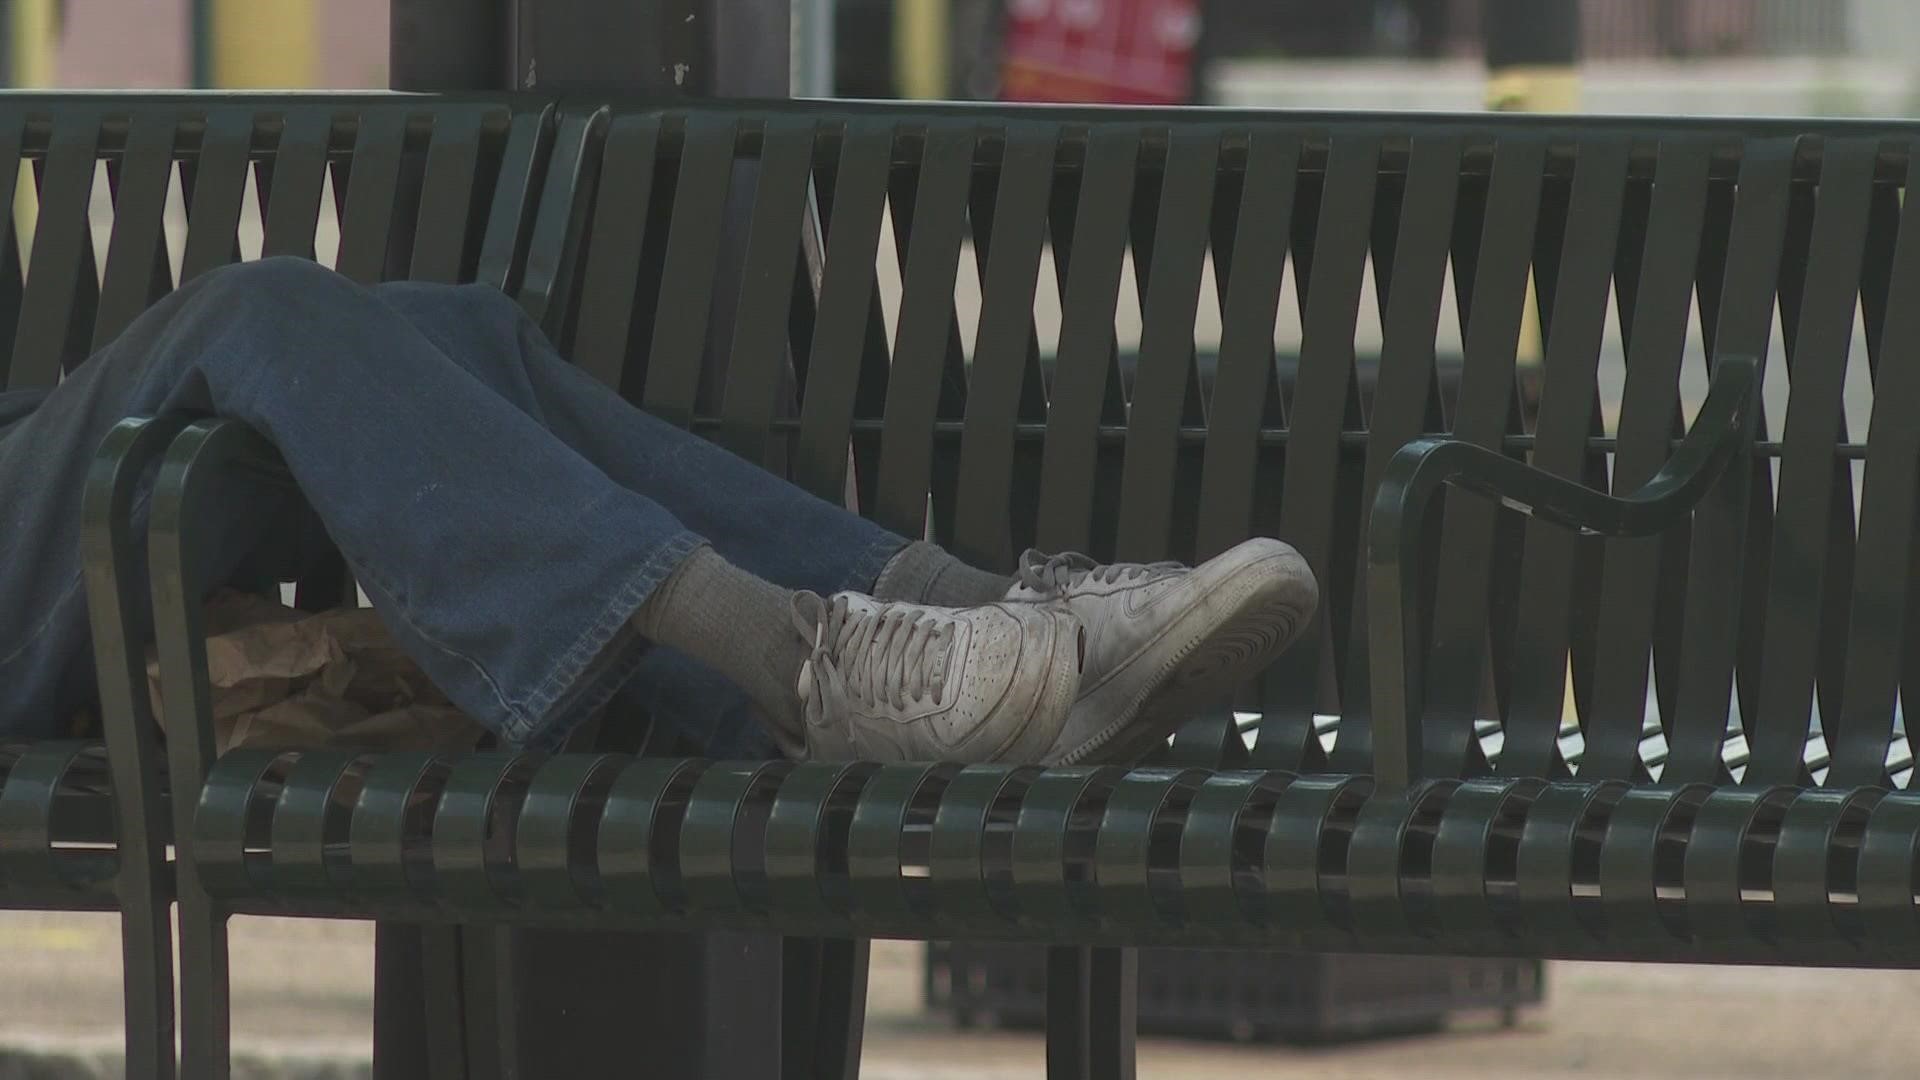 Business owners we spoke with say homeless problem is hurting French Quarter.